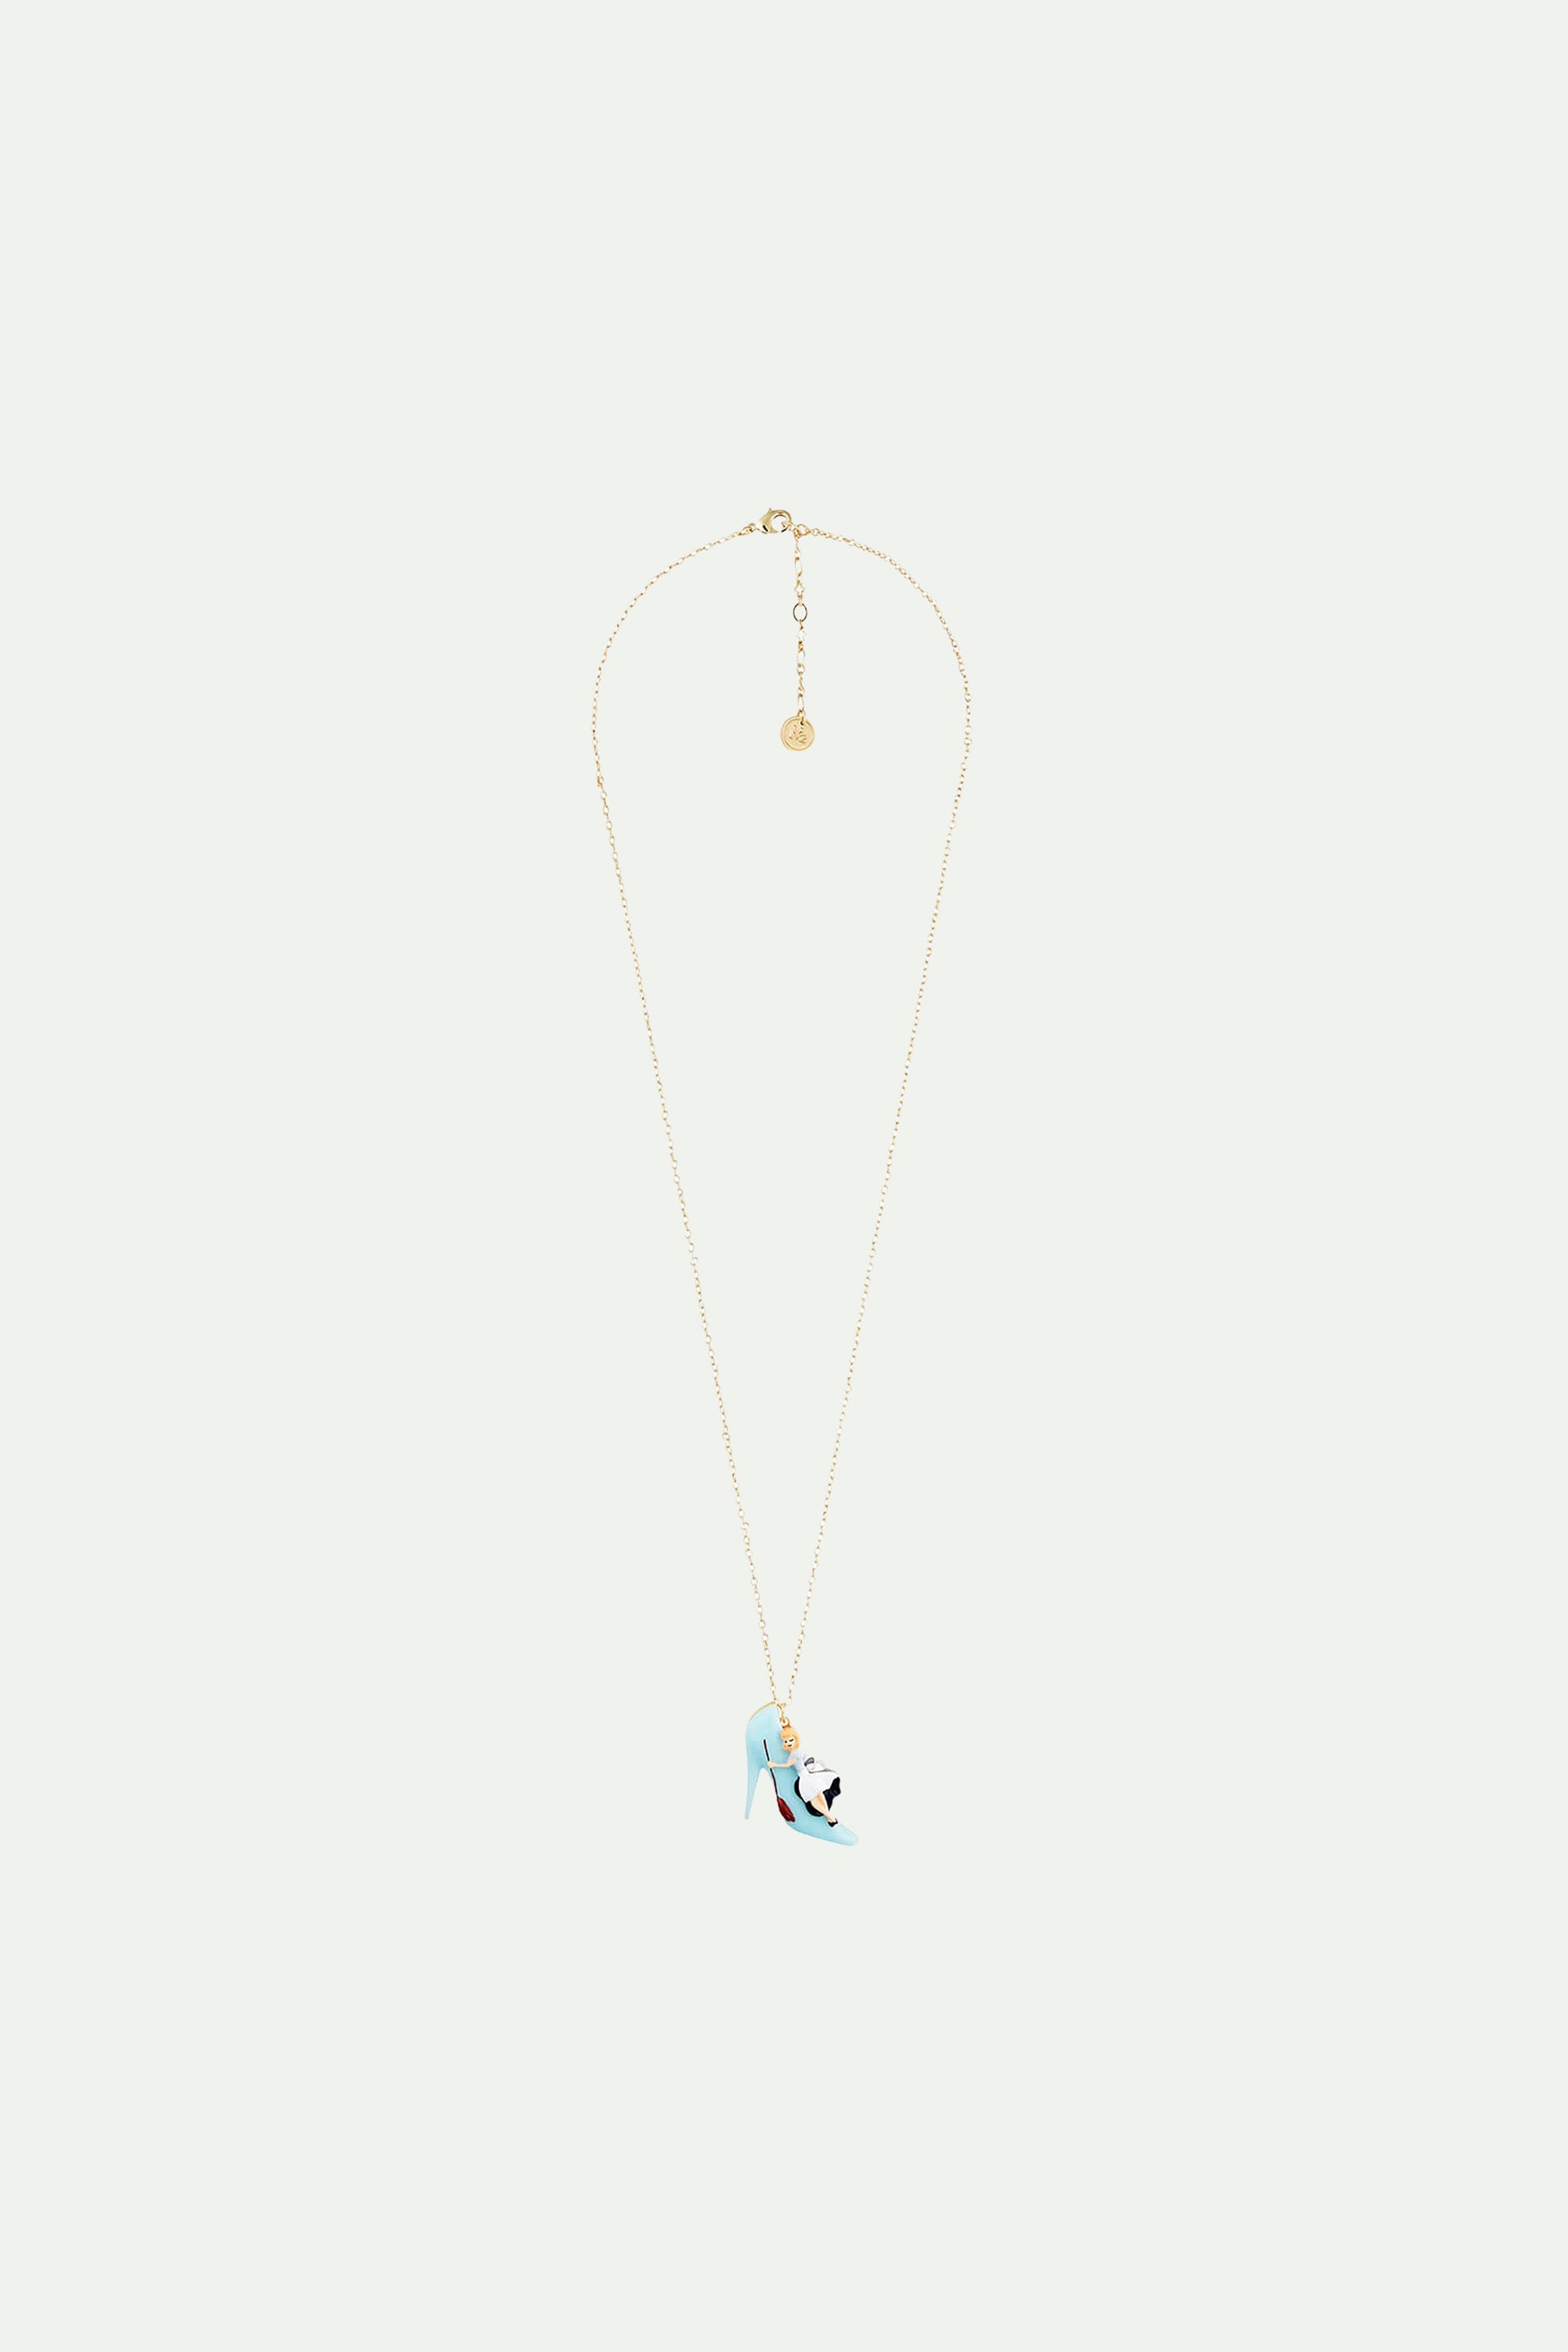 Cinderella and Slipper long necklace